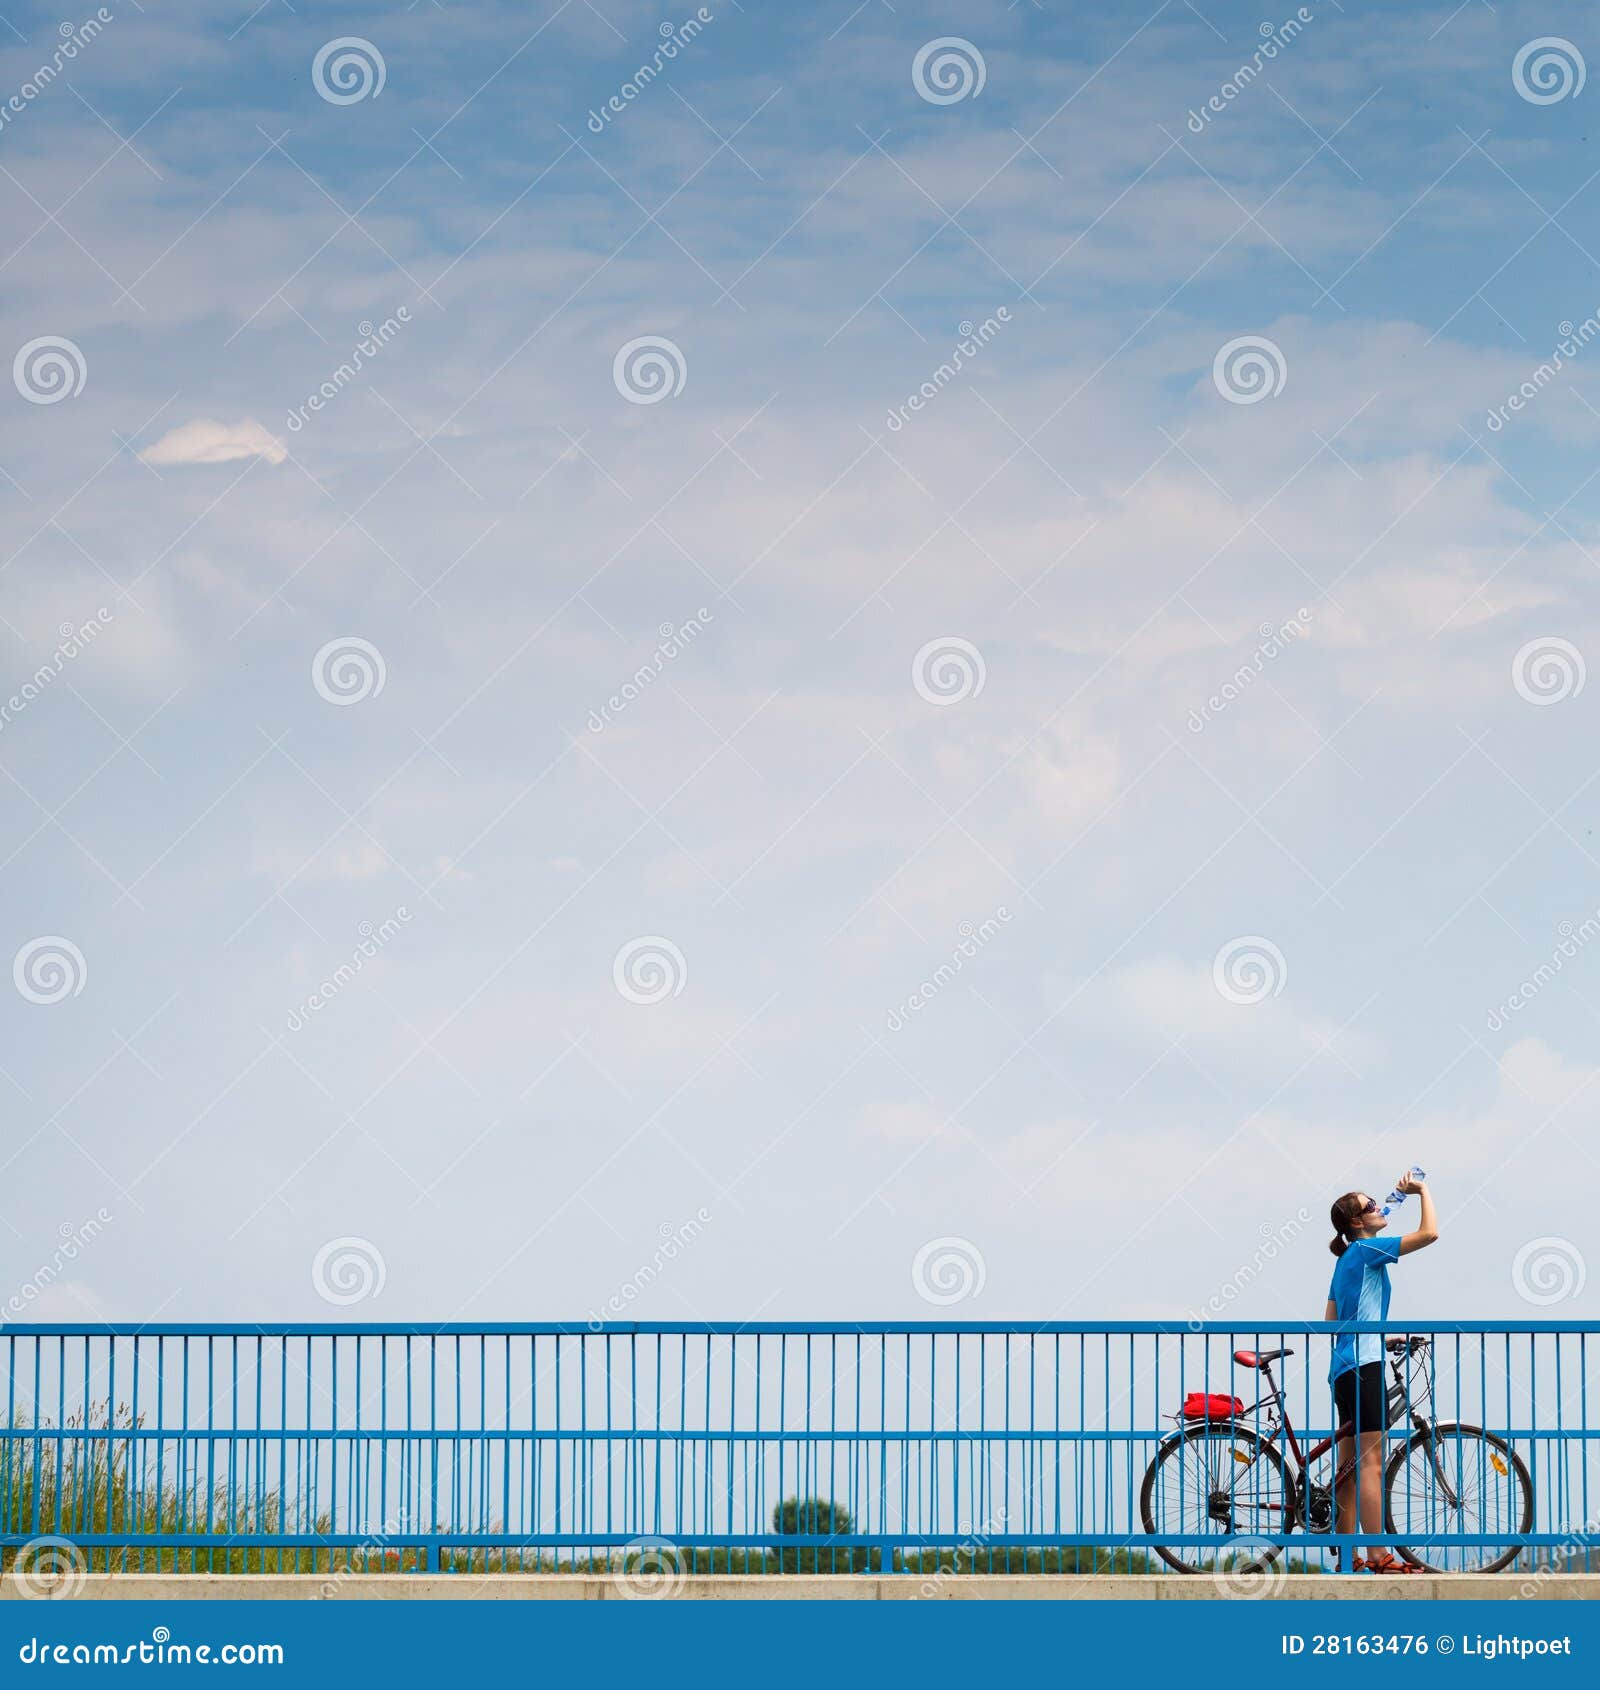 background for poster or advertisment pertaining to cycling